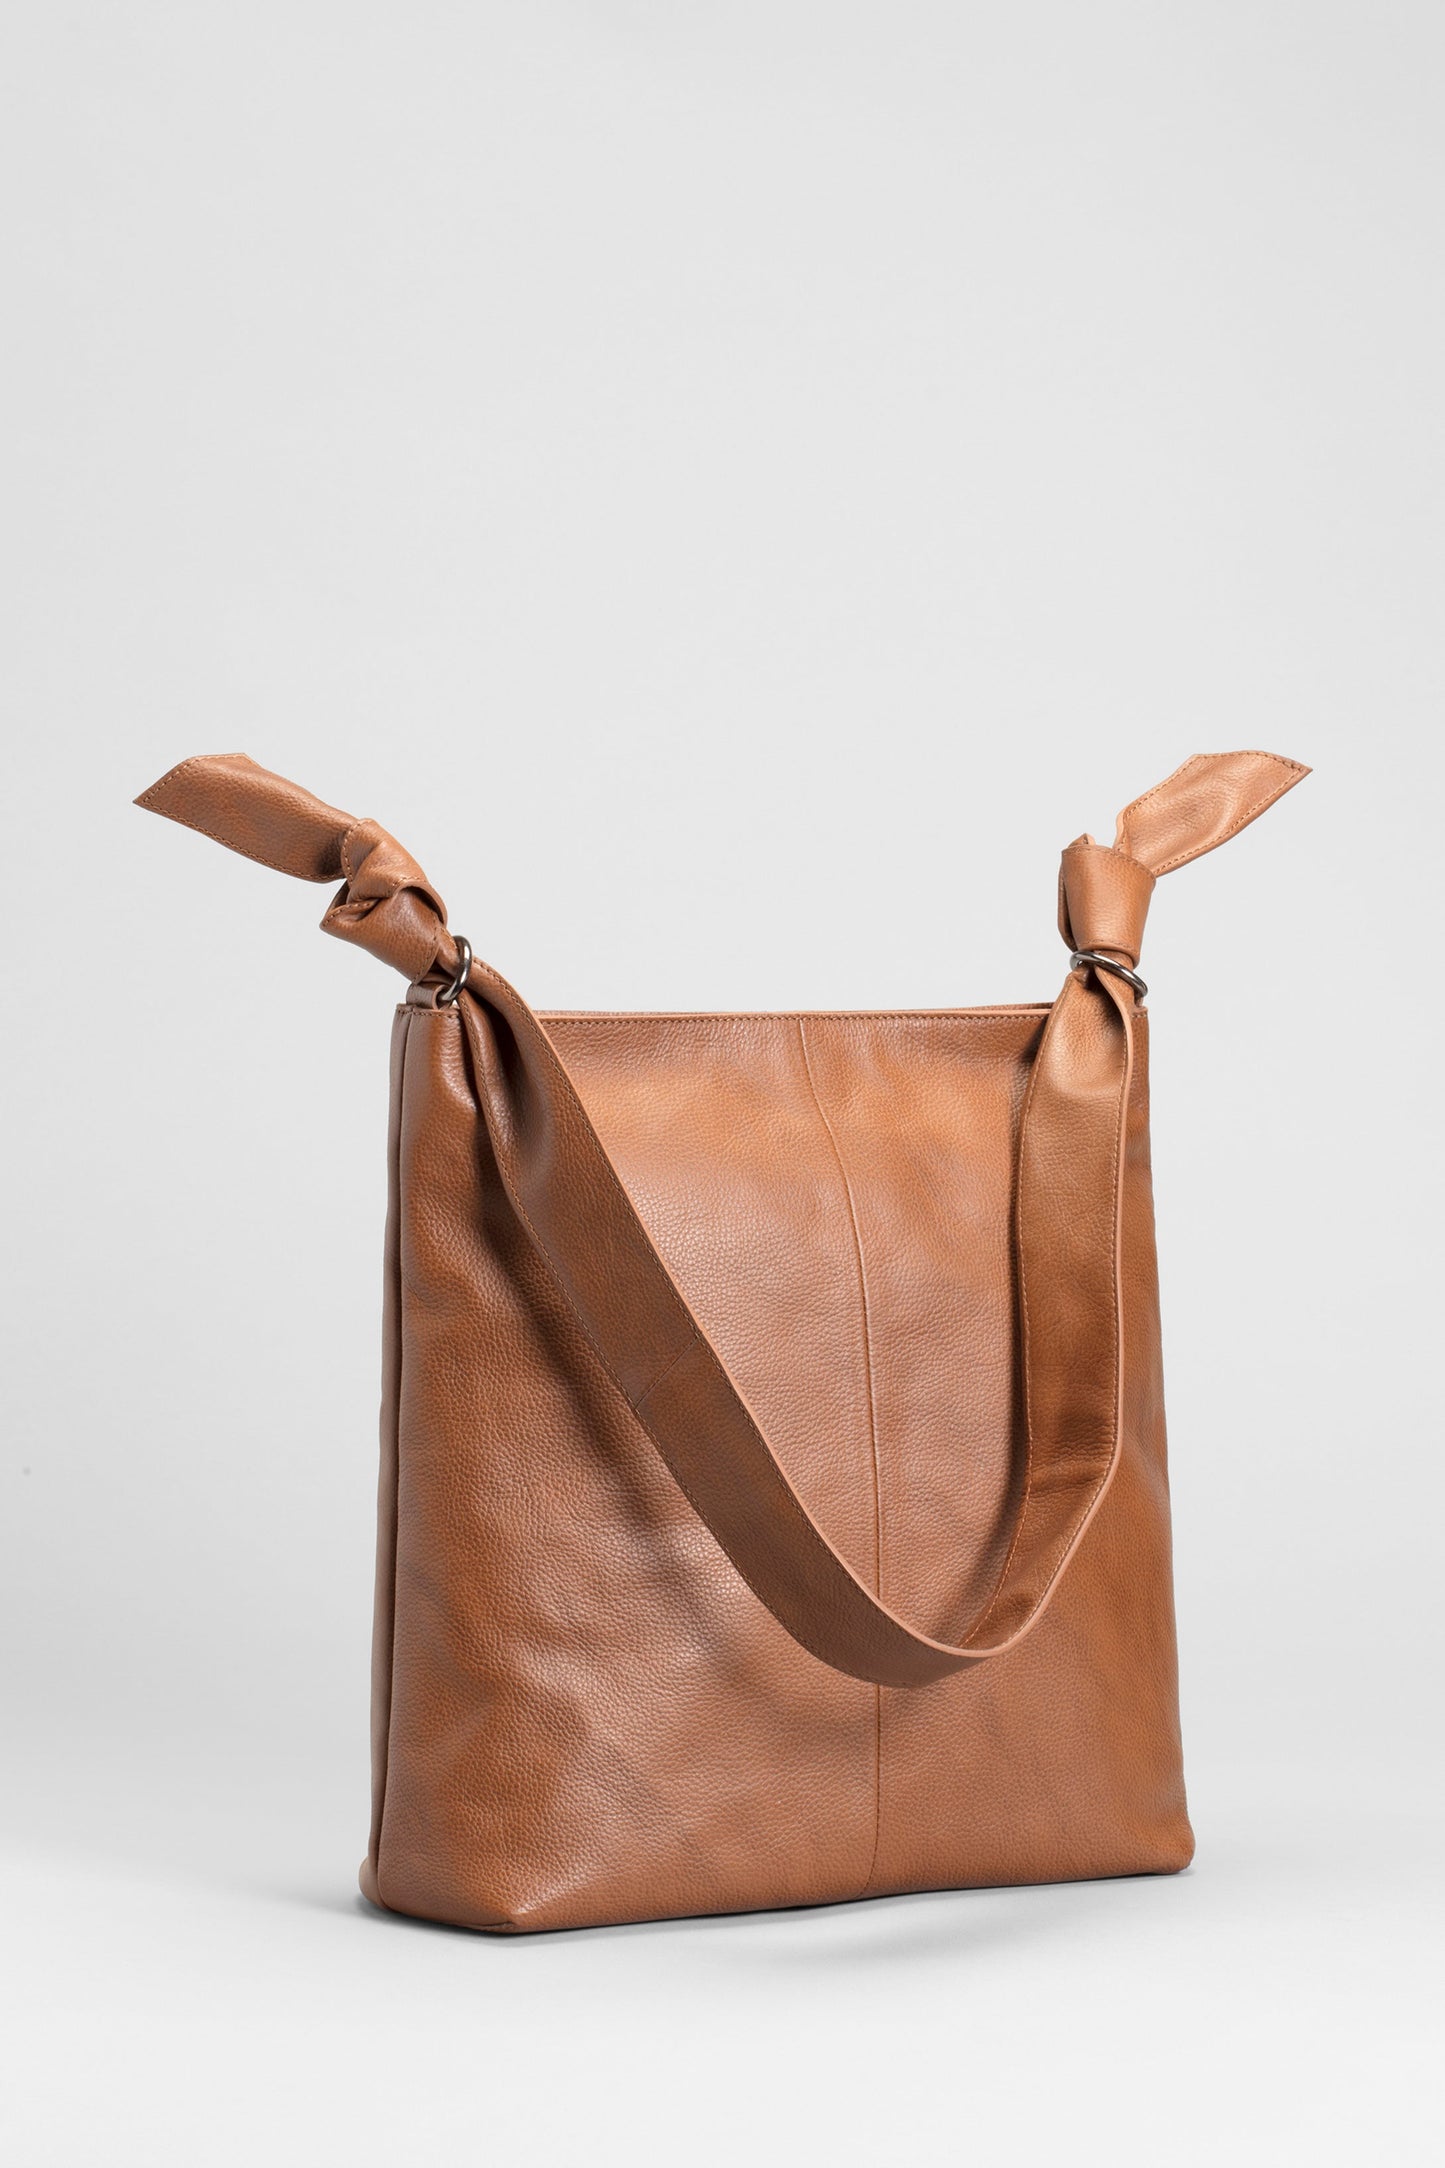 Meka Leather Knot Strap Tote Hand Bag Front TAN